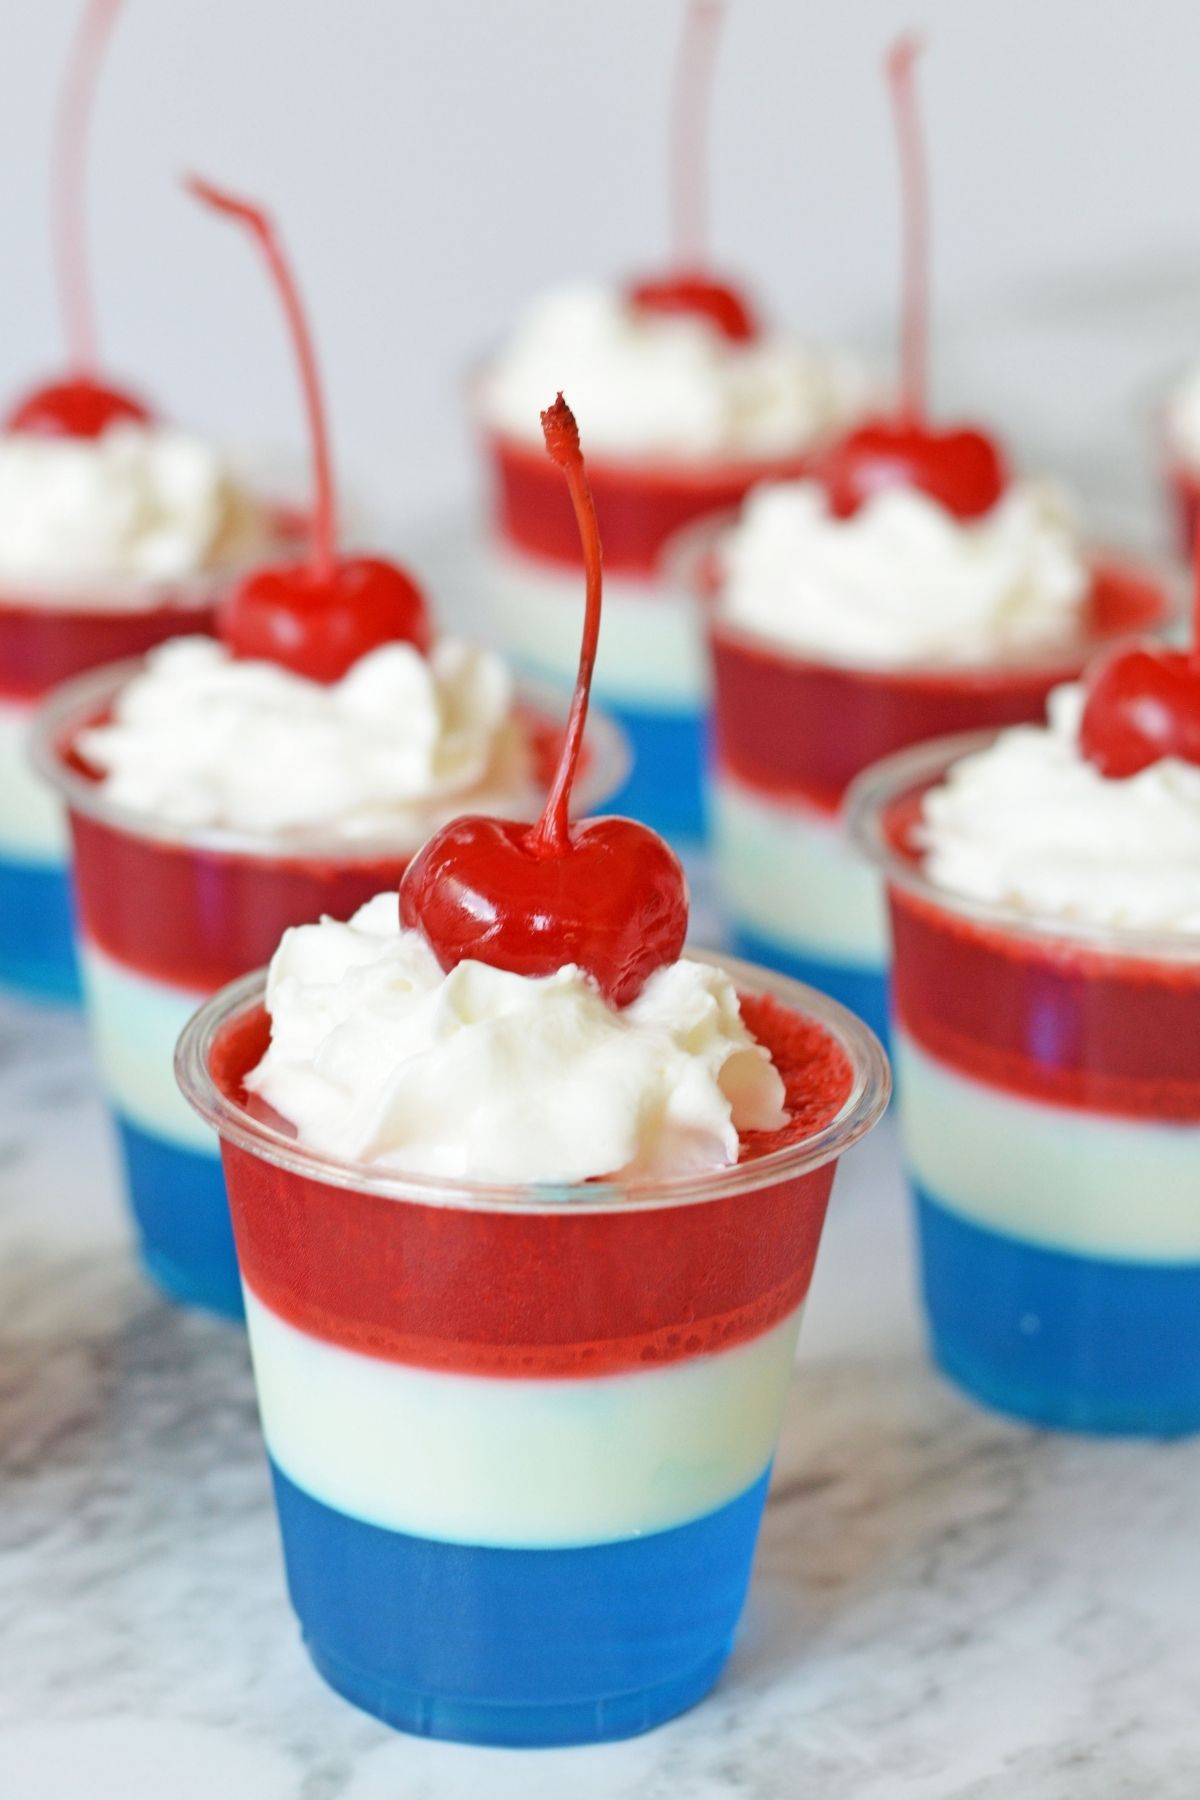 red, white and blue jello shots in small cups with whipped cream and maraschino cherries